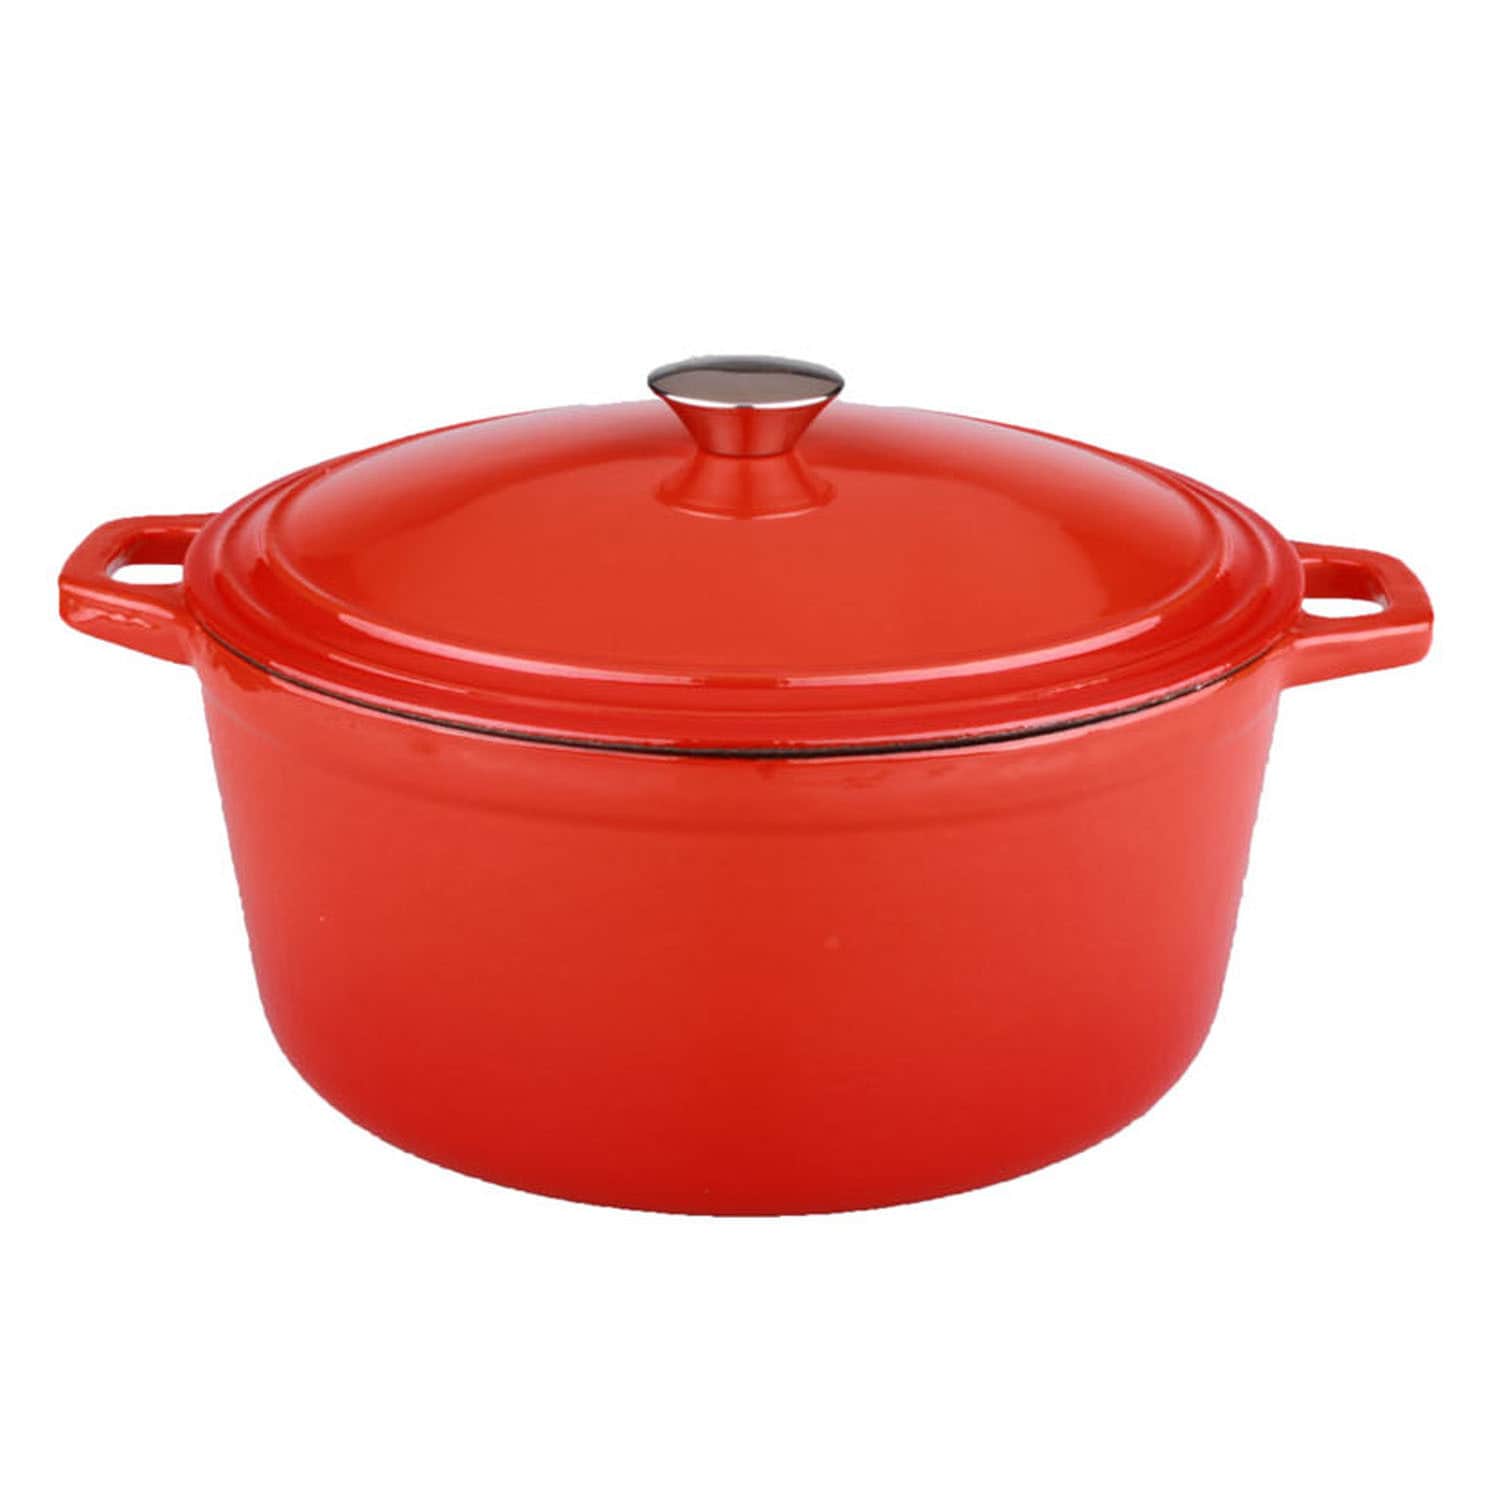 https://ak1.ostkcdn.com/images/products/10574984/Neo-5-quart-Cast-Iron-Oval-Covered-Casserole-Dish-e3125051-a08d-441c-9990-bbeb54303afc.jpg